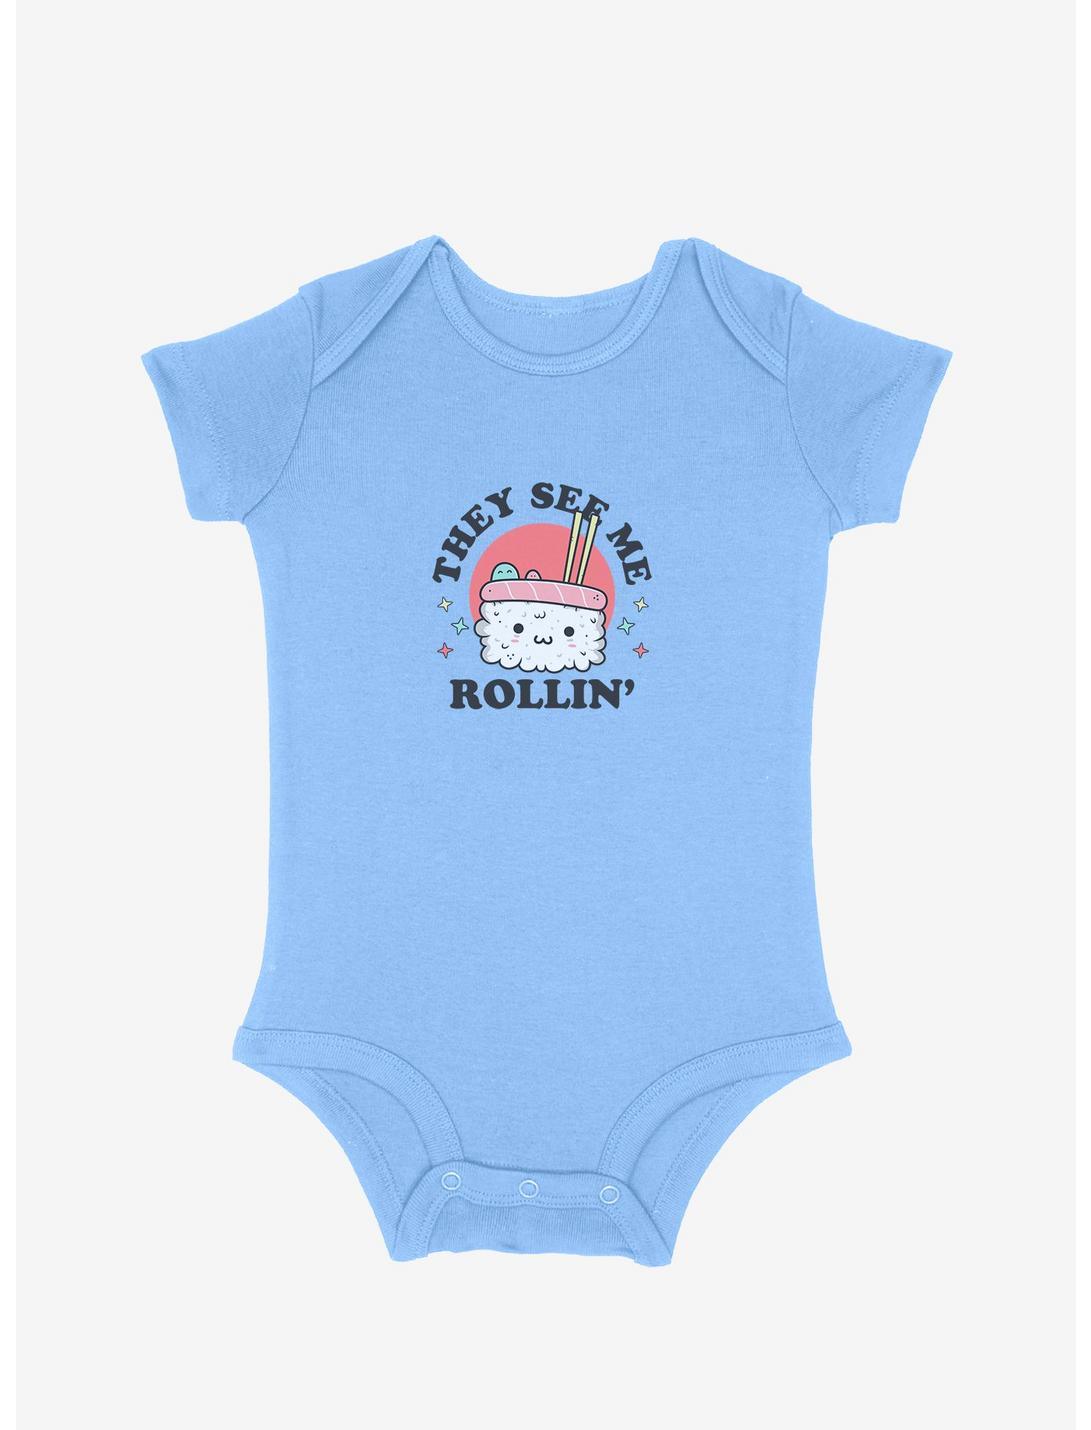 Mommy & Me They See Me Rollin' Infant Bodysuit, LIGHT BLUE, hi-res